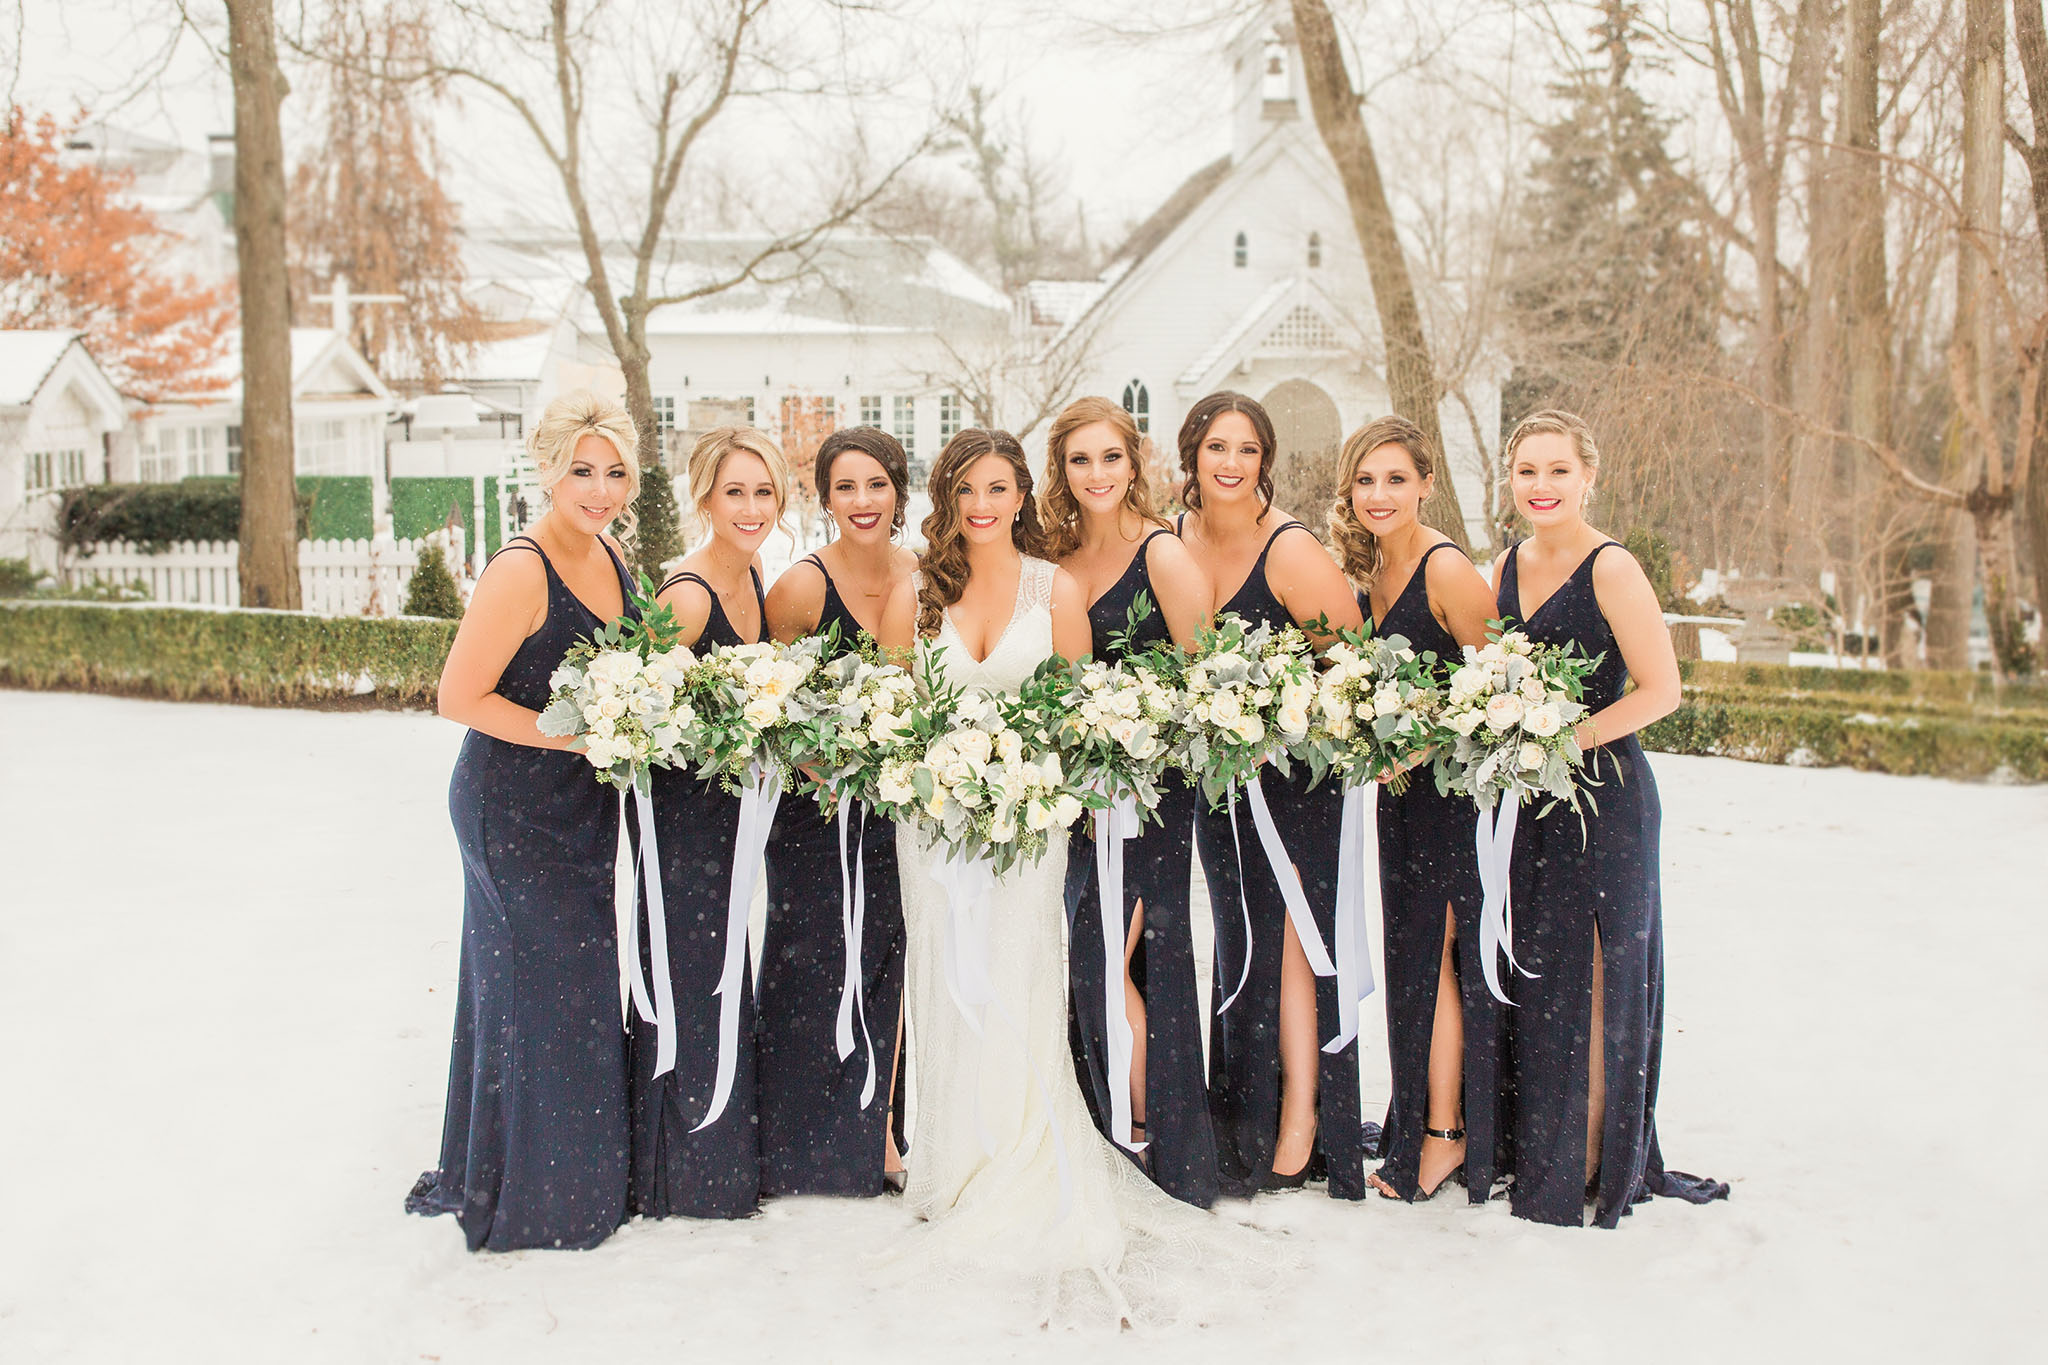 Full bridal party at the Doctors House in Kleinburg. Awesome winter wedding venue.